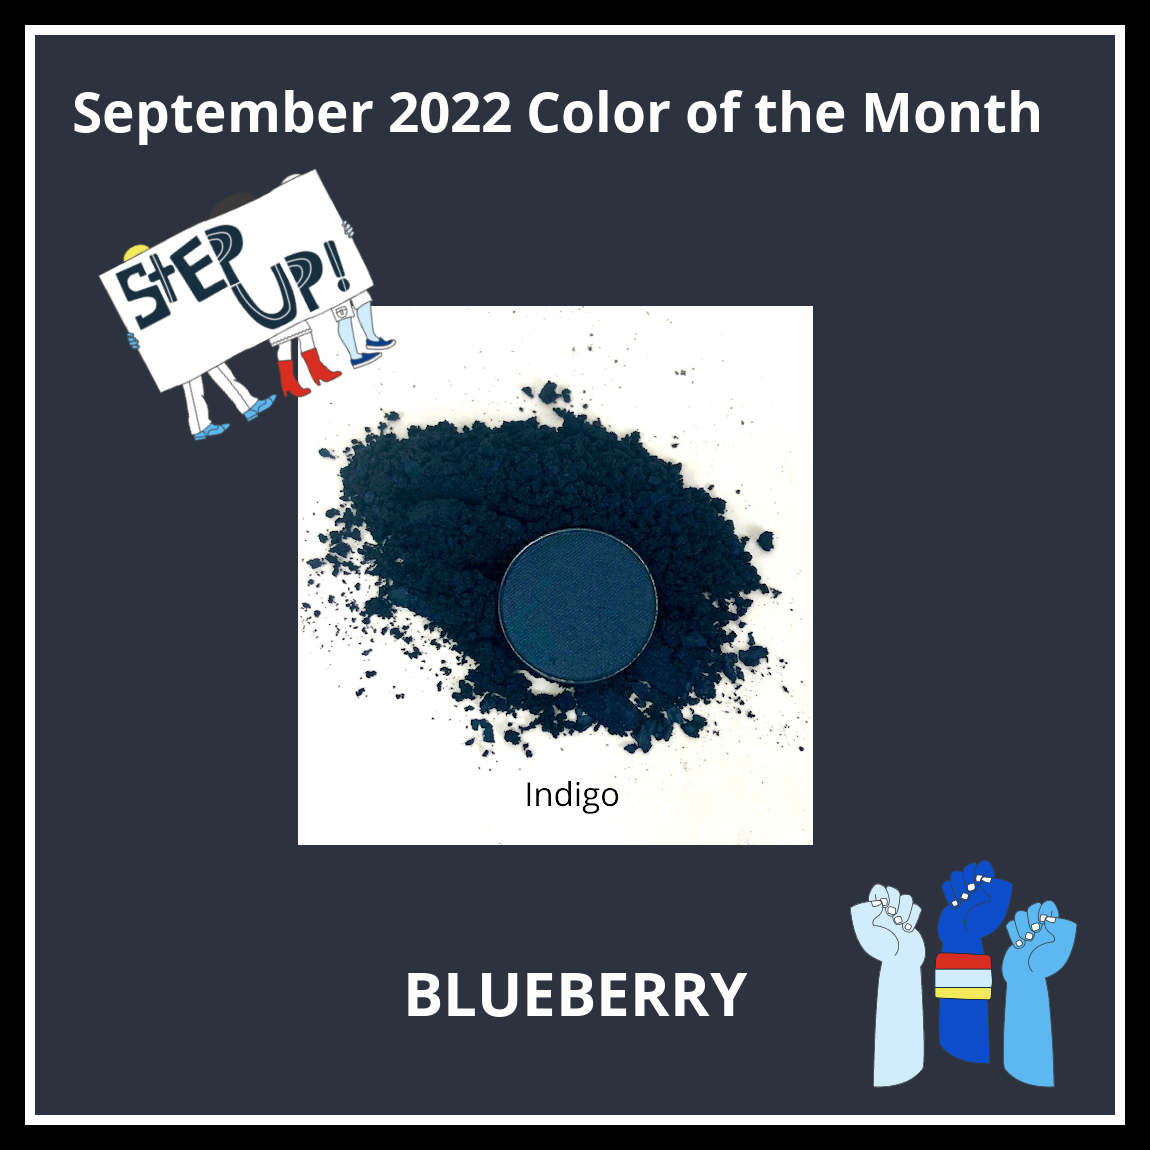 September 2022 Color of the Month is Blueberry